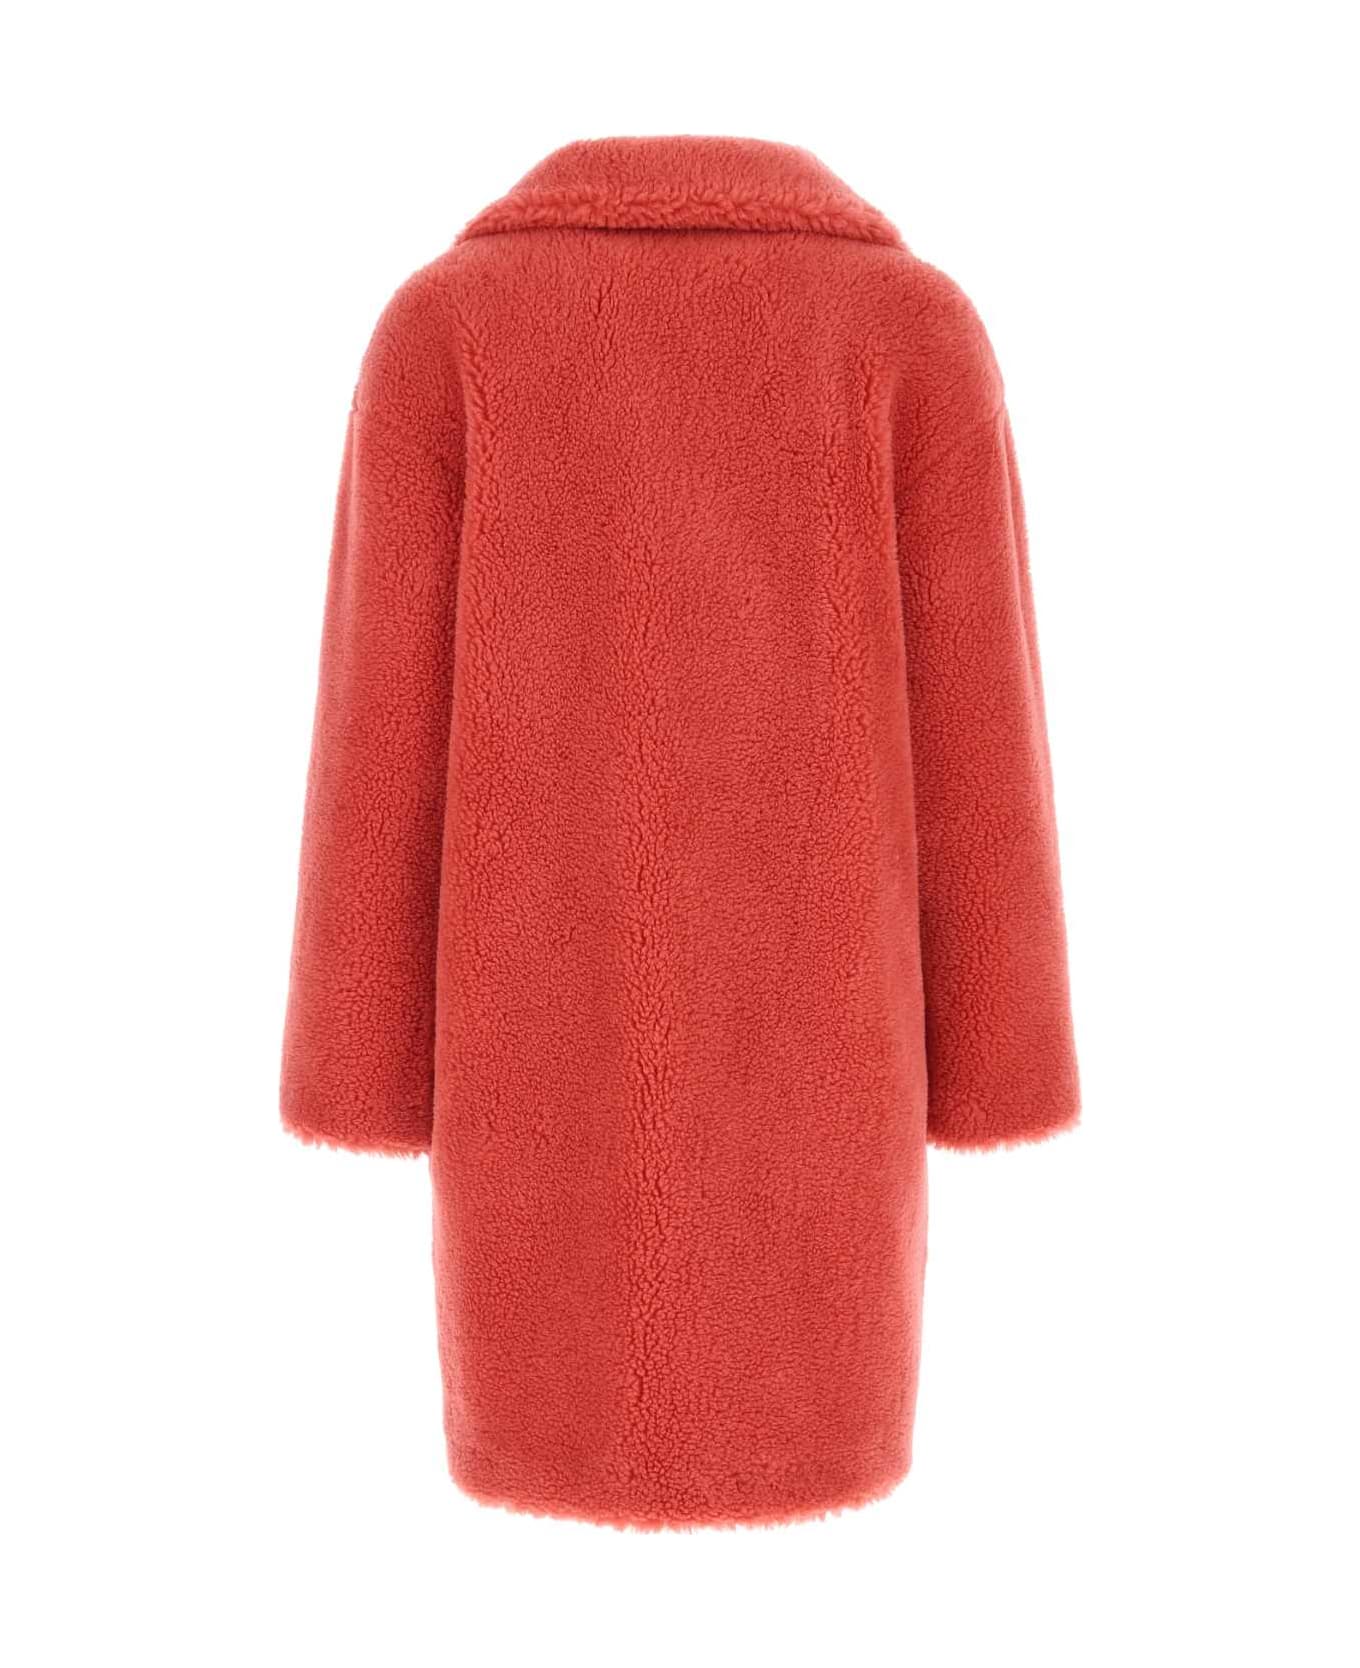 STAND STUDIO Light Red Teddy Camille Cocoon Coat - 24900